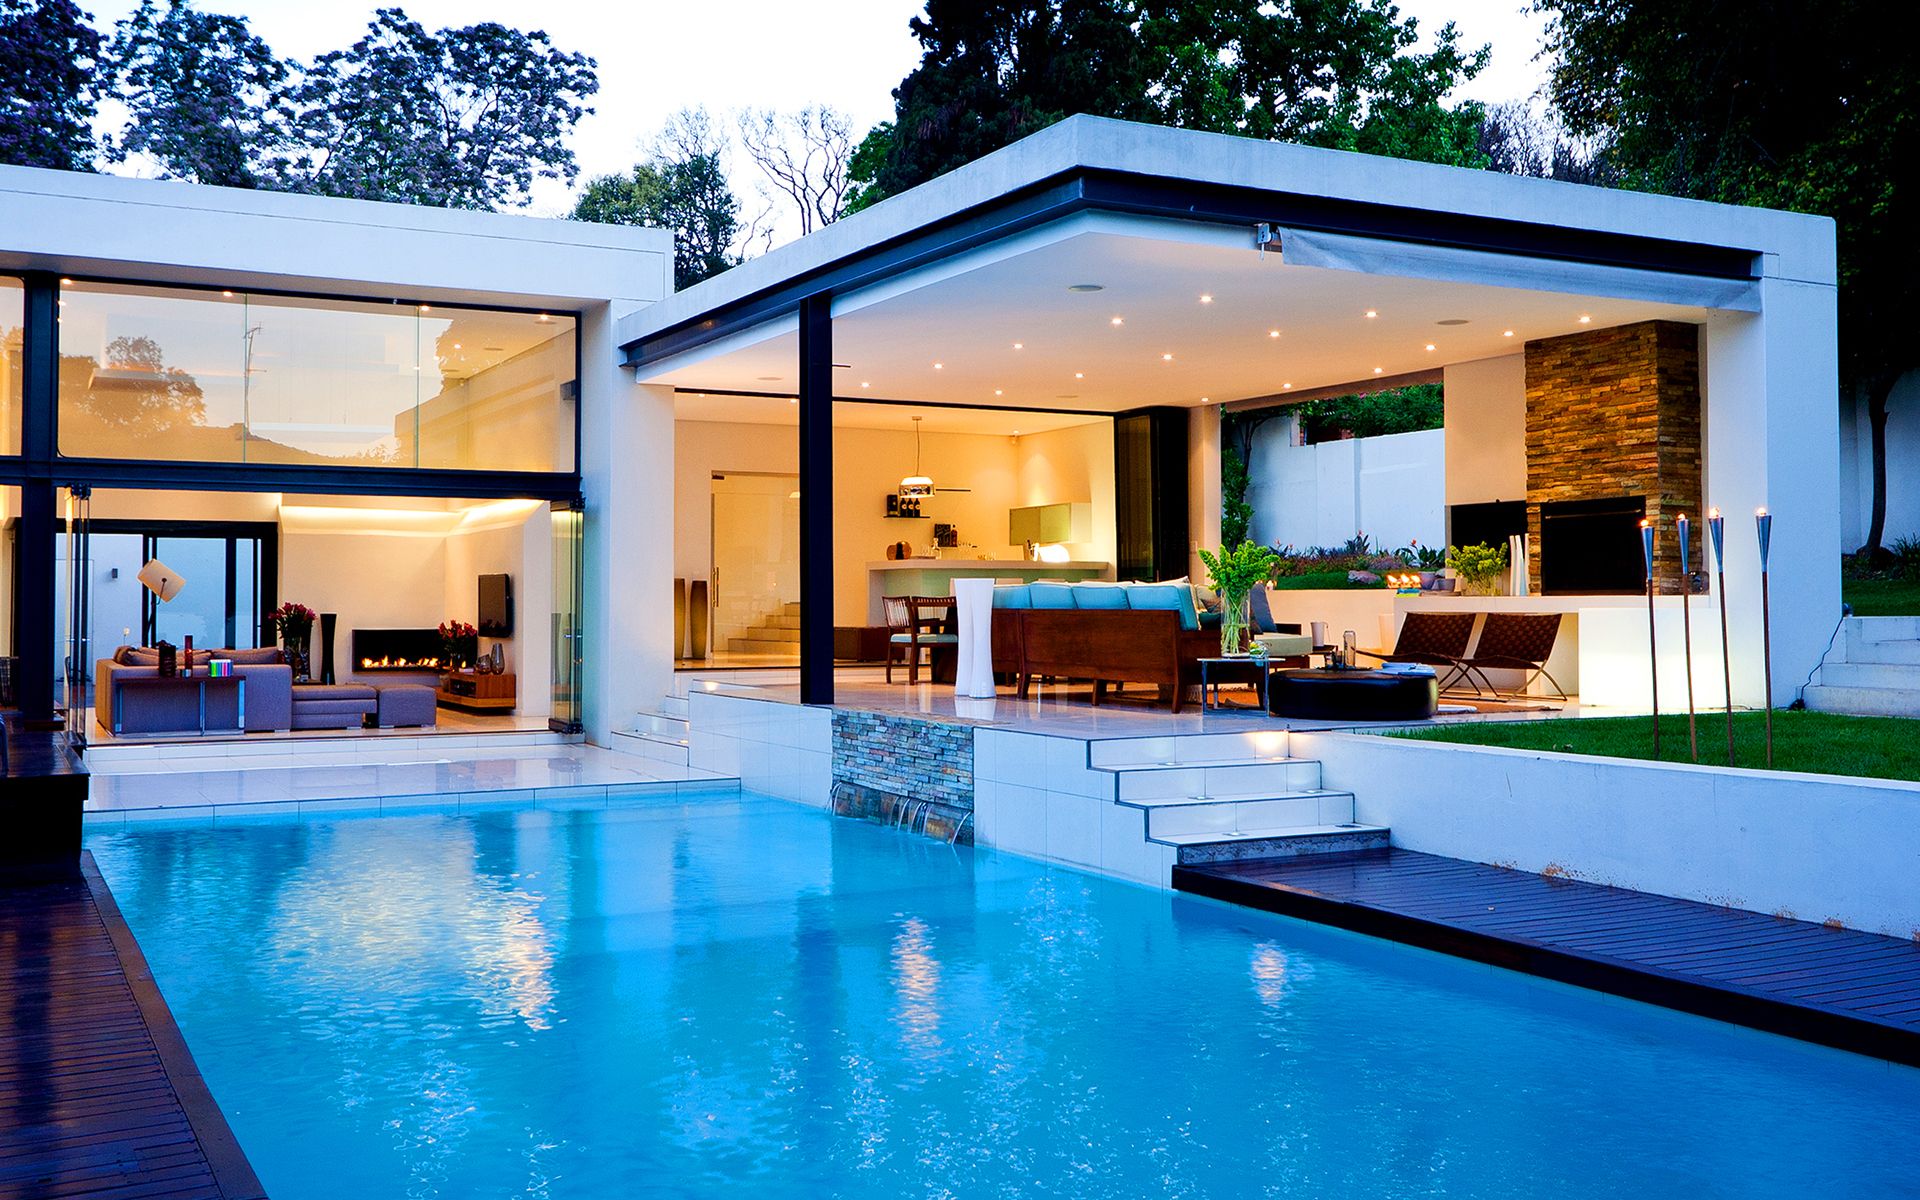 Luxury house with pool wallpaperx1200